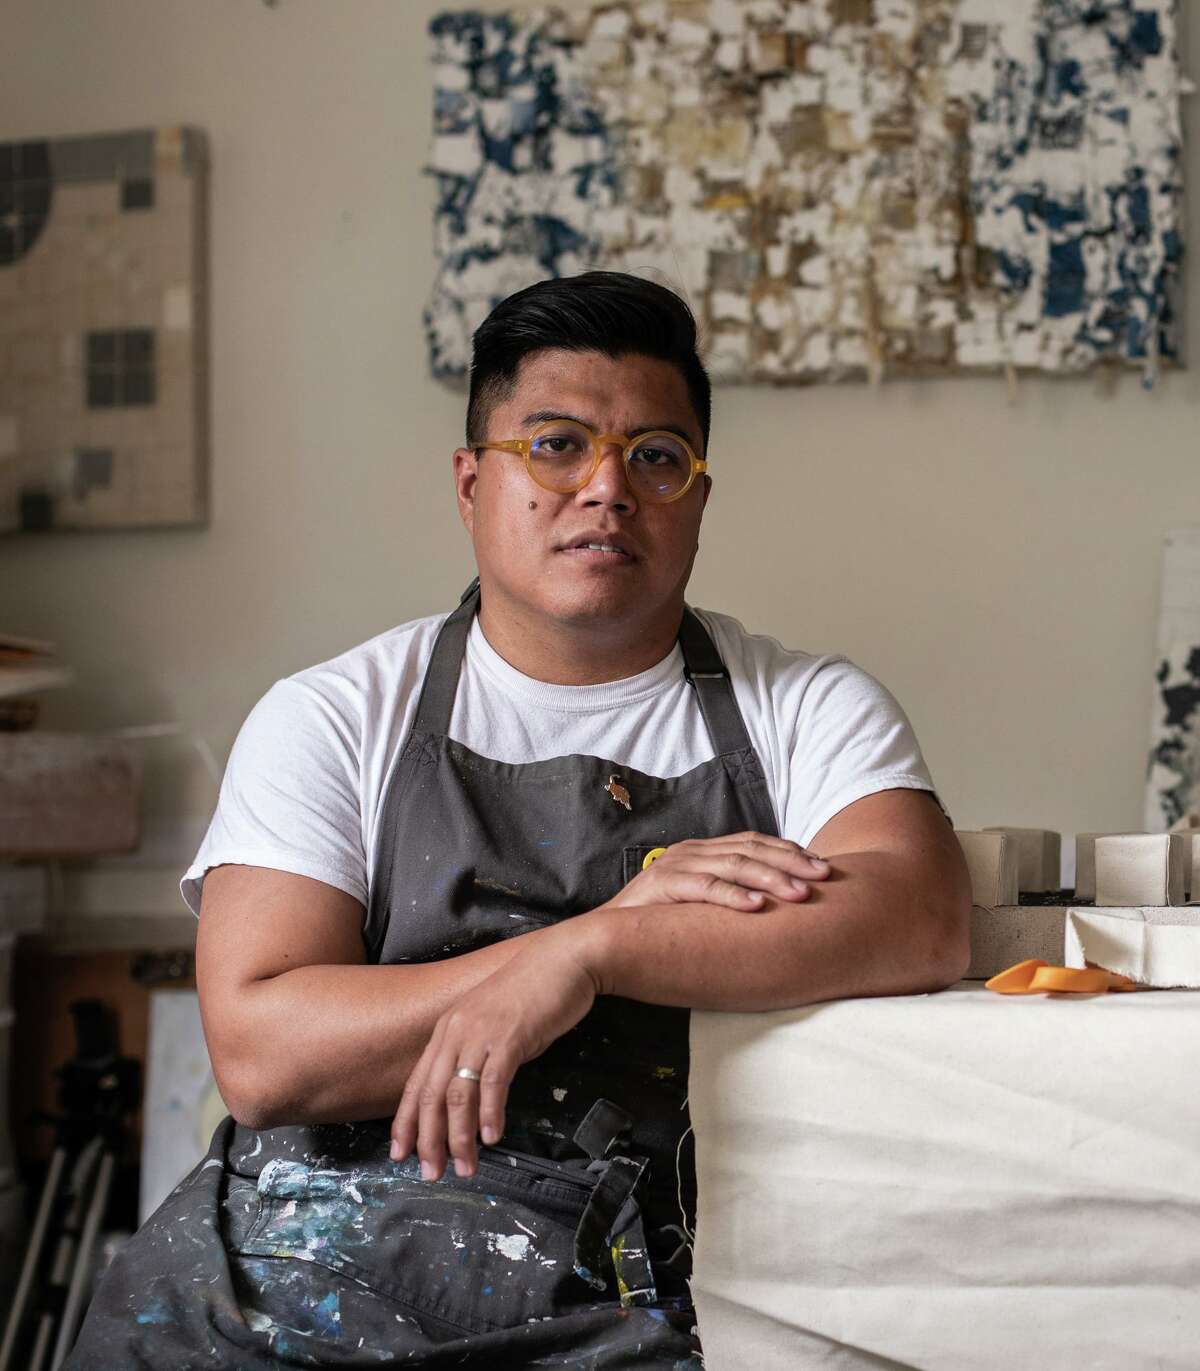 Houston artist Matt Manalo is among the emerging artists featured at the McNay Art Museum as part of the 2021 Texas Biennial exhibition.